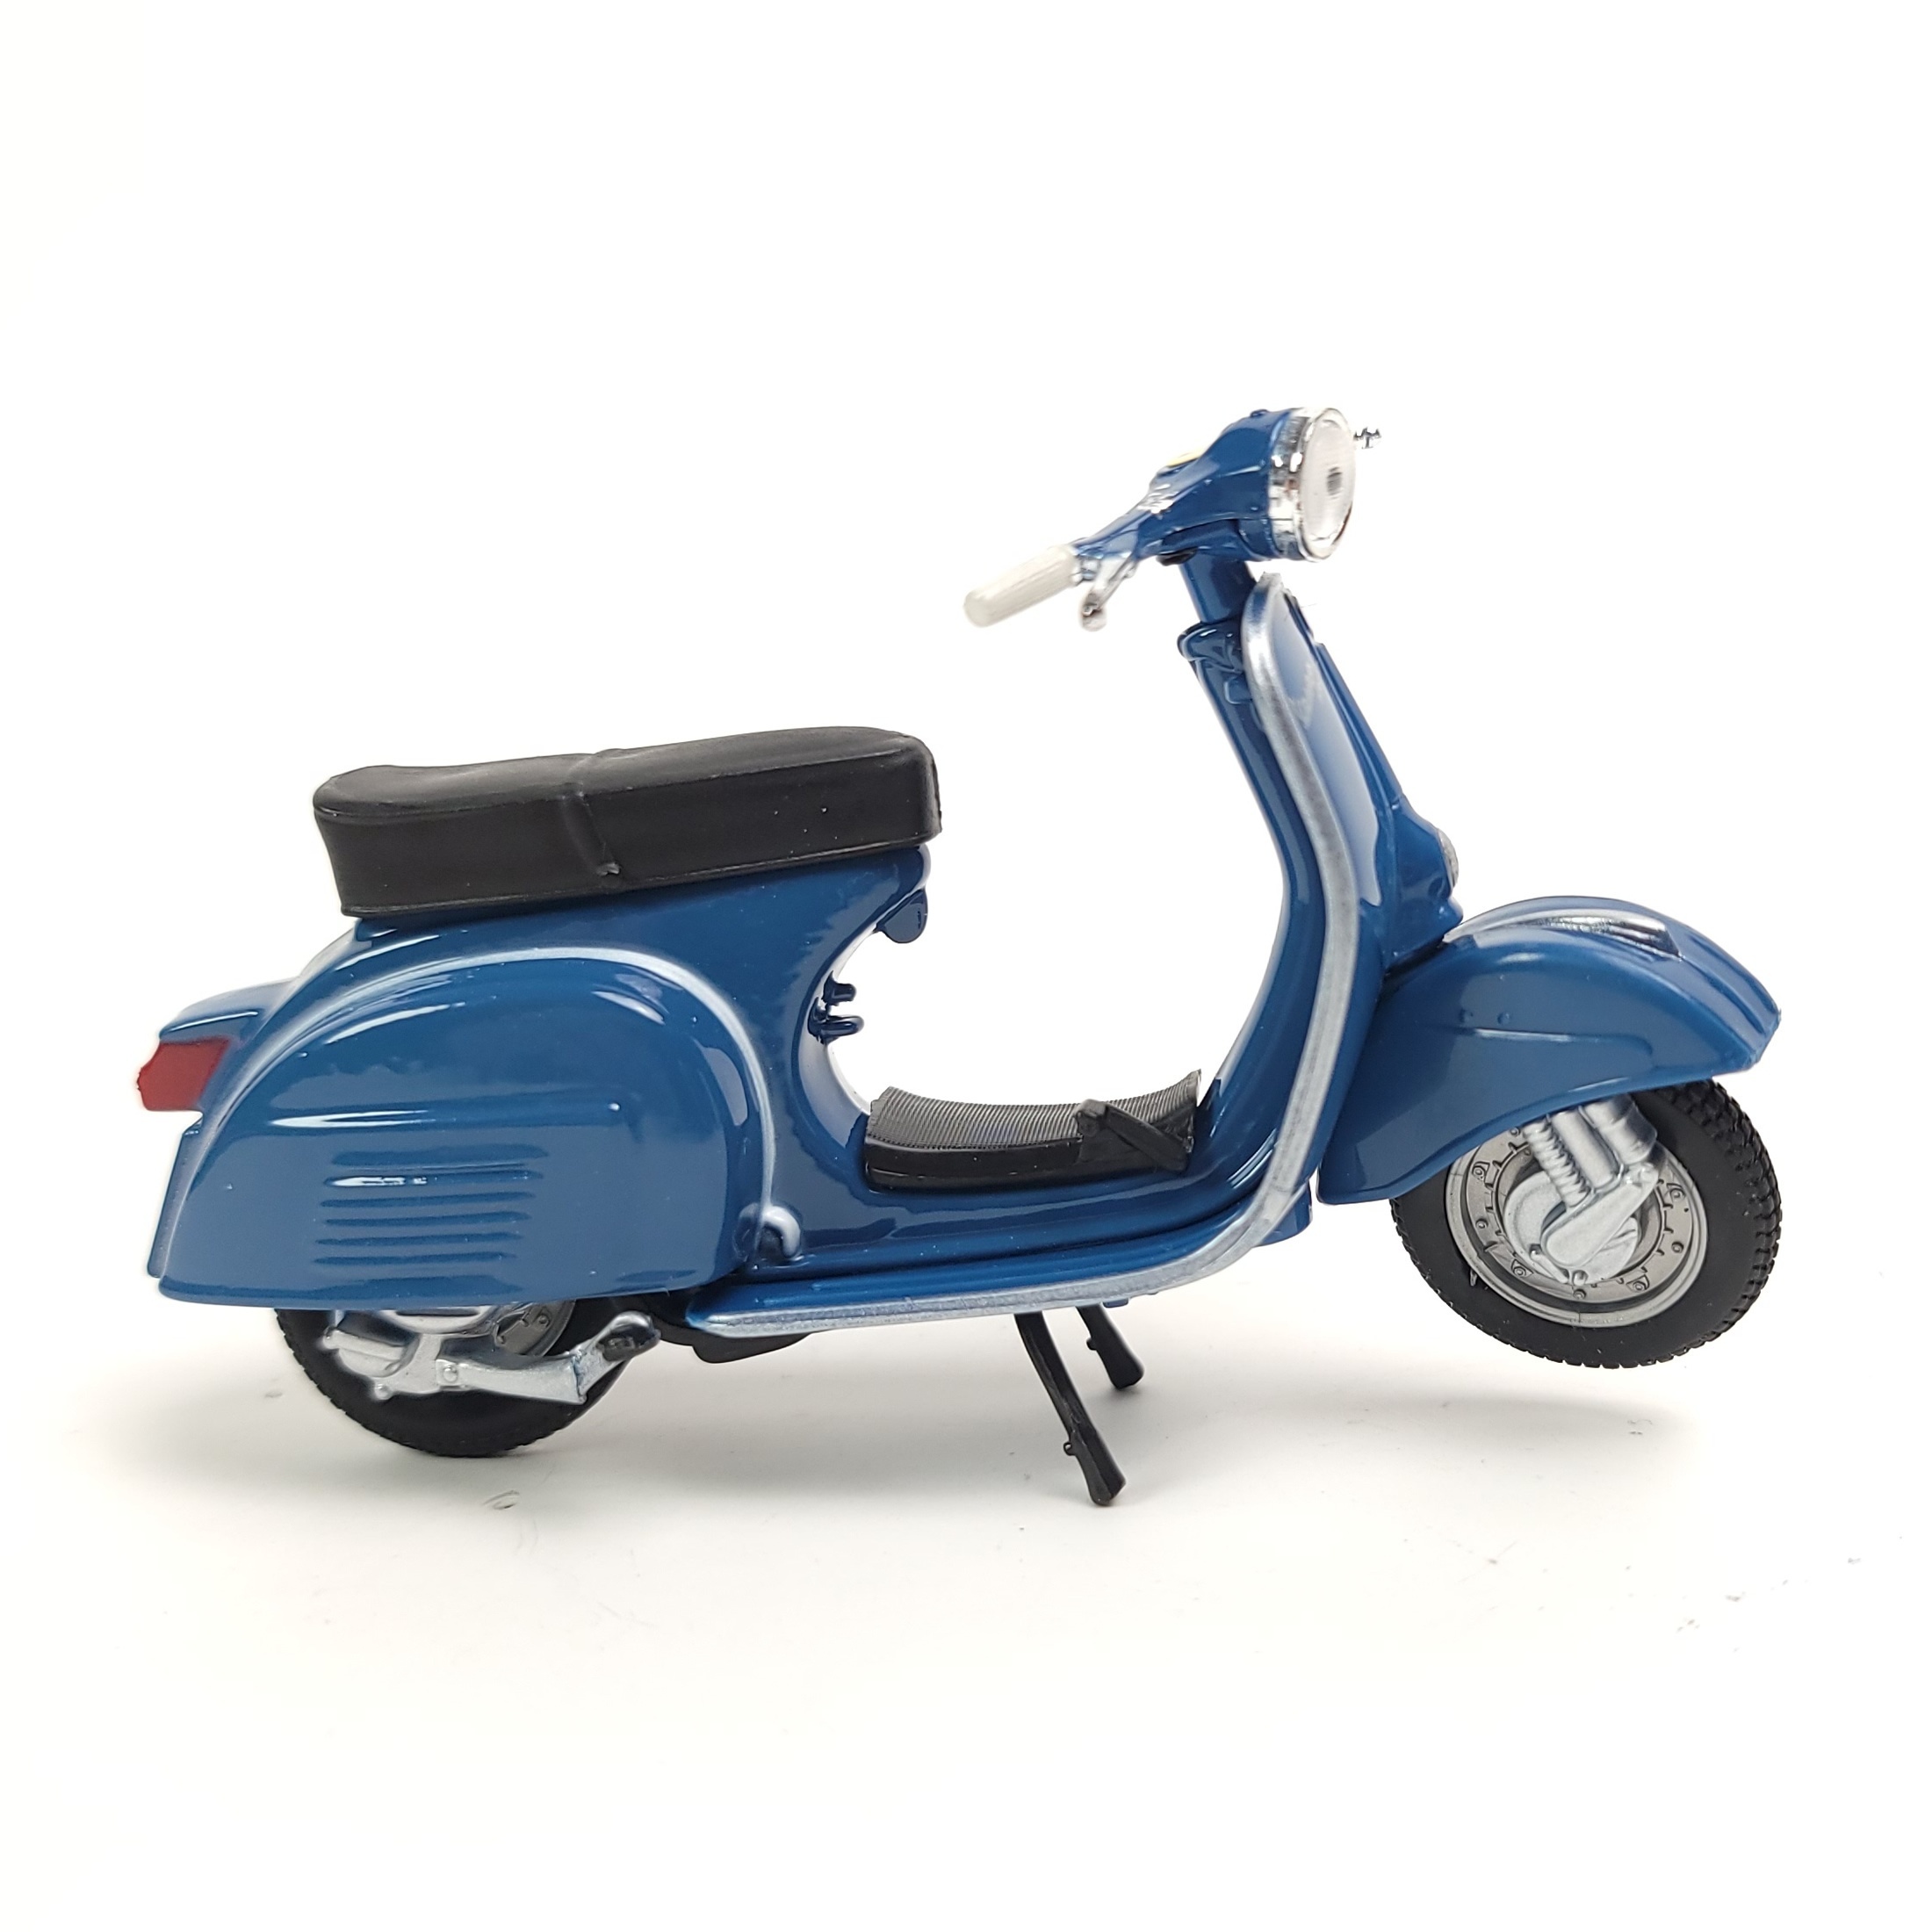 

Maisto 1/18 Scale 1969 Vespa Sprint Veloce Moped Model - Collectible Mini Scooter Figurine, Roman Holiday Souvenir & Cake Topper, Perfect Gift For Adults